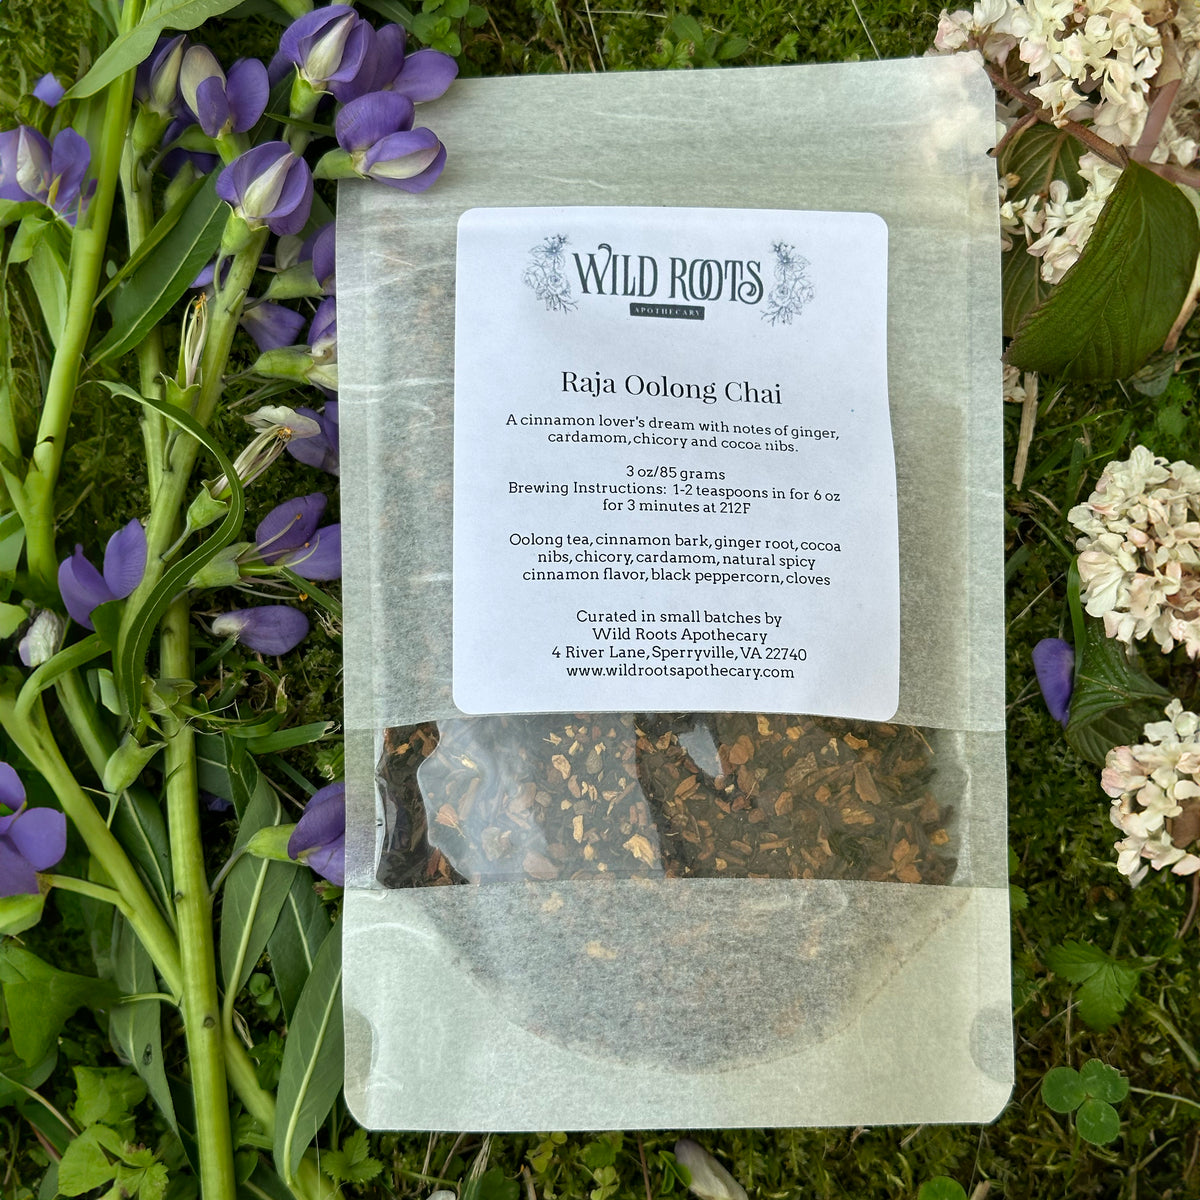 Spiced Oolong Chai (Raja Oolong Chai)—Wild Roots Apothecary